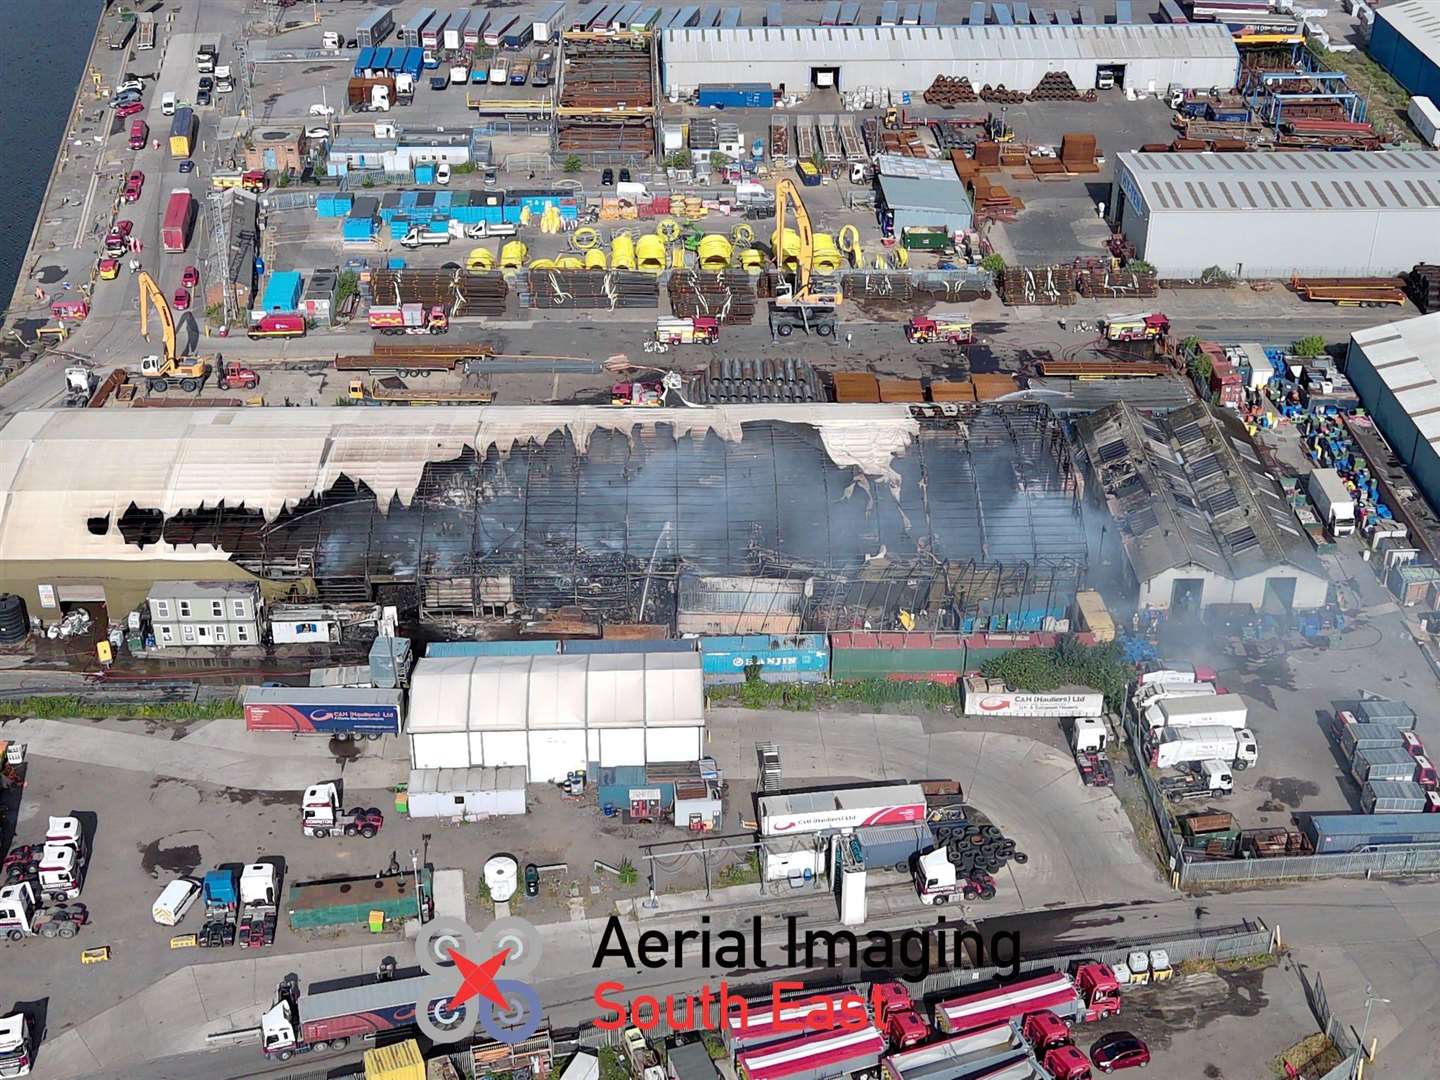 Drone images show the extent of the damage to the warehouse at Chatham Docks. Picture: @AerialimagingSE